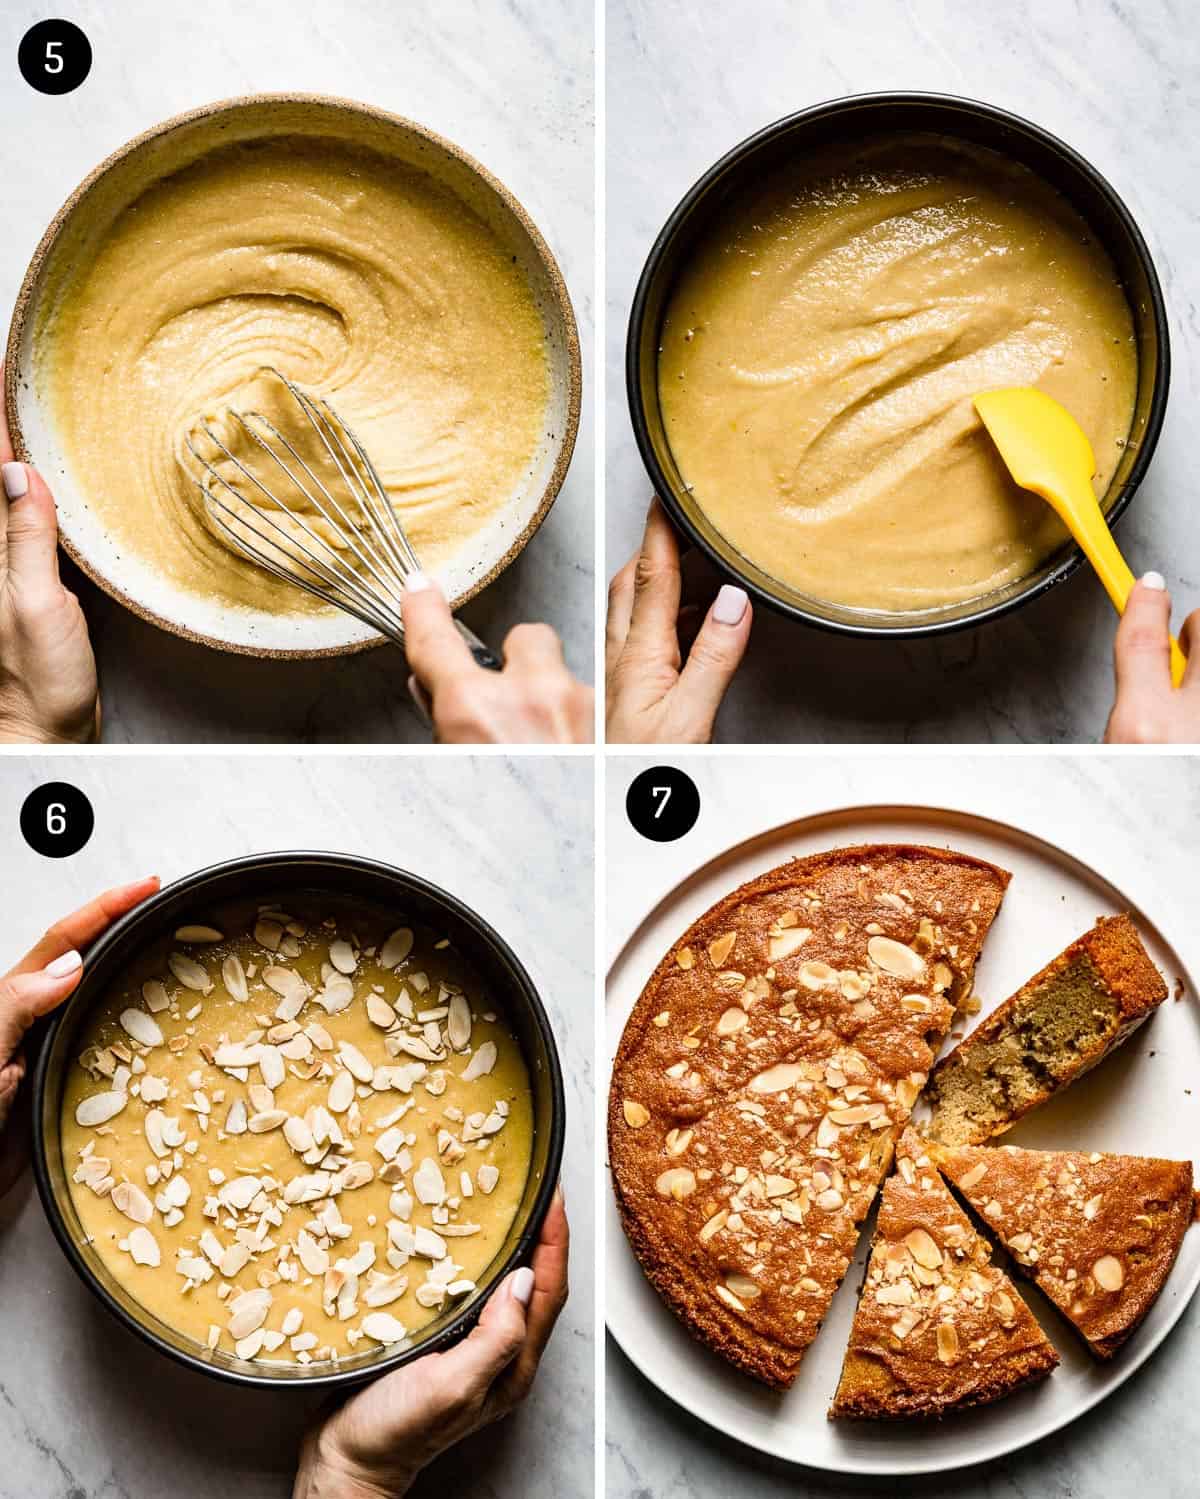 photos showing how to make and bake almond flour cake